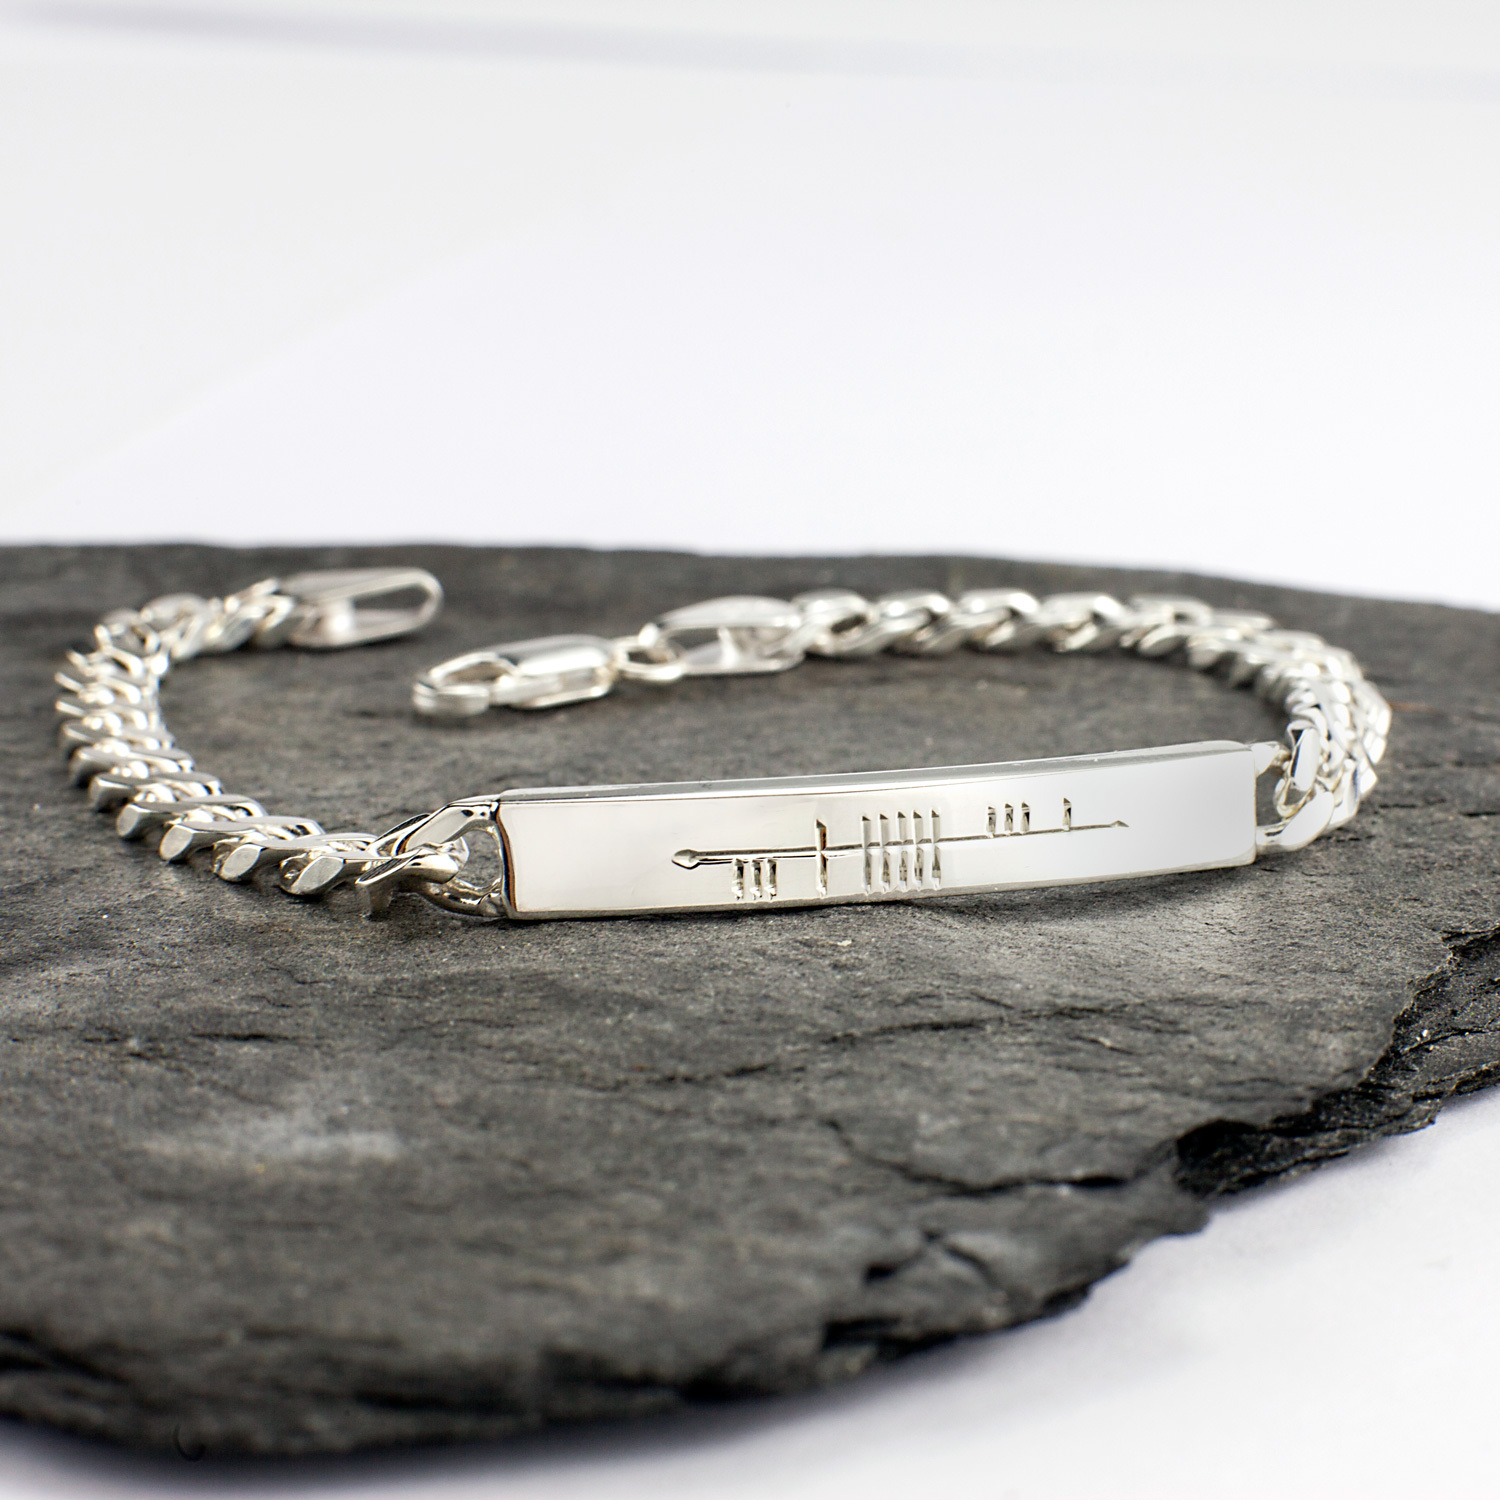 Customizable Stainless Steel Name Bracelets & Cuff Bangles Today For Women  And Men Gold Color With Handwriting Script B3124 From Yscrd, $30.45 |  DHgate.Com